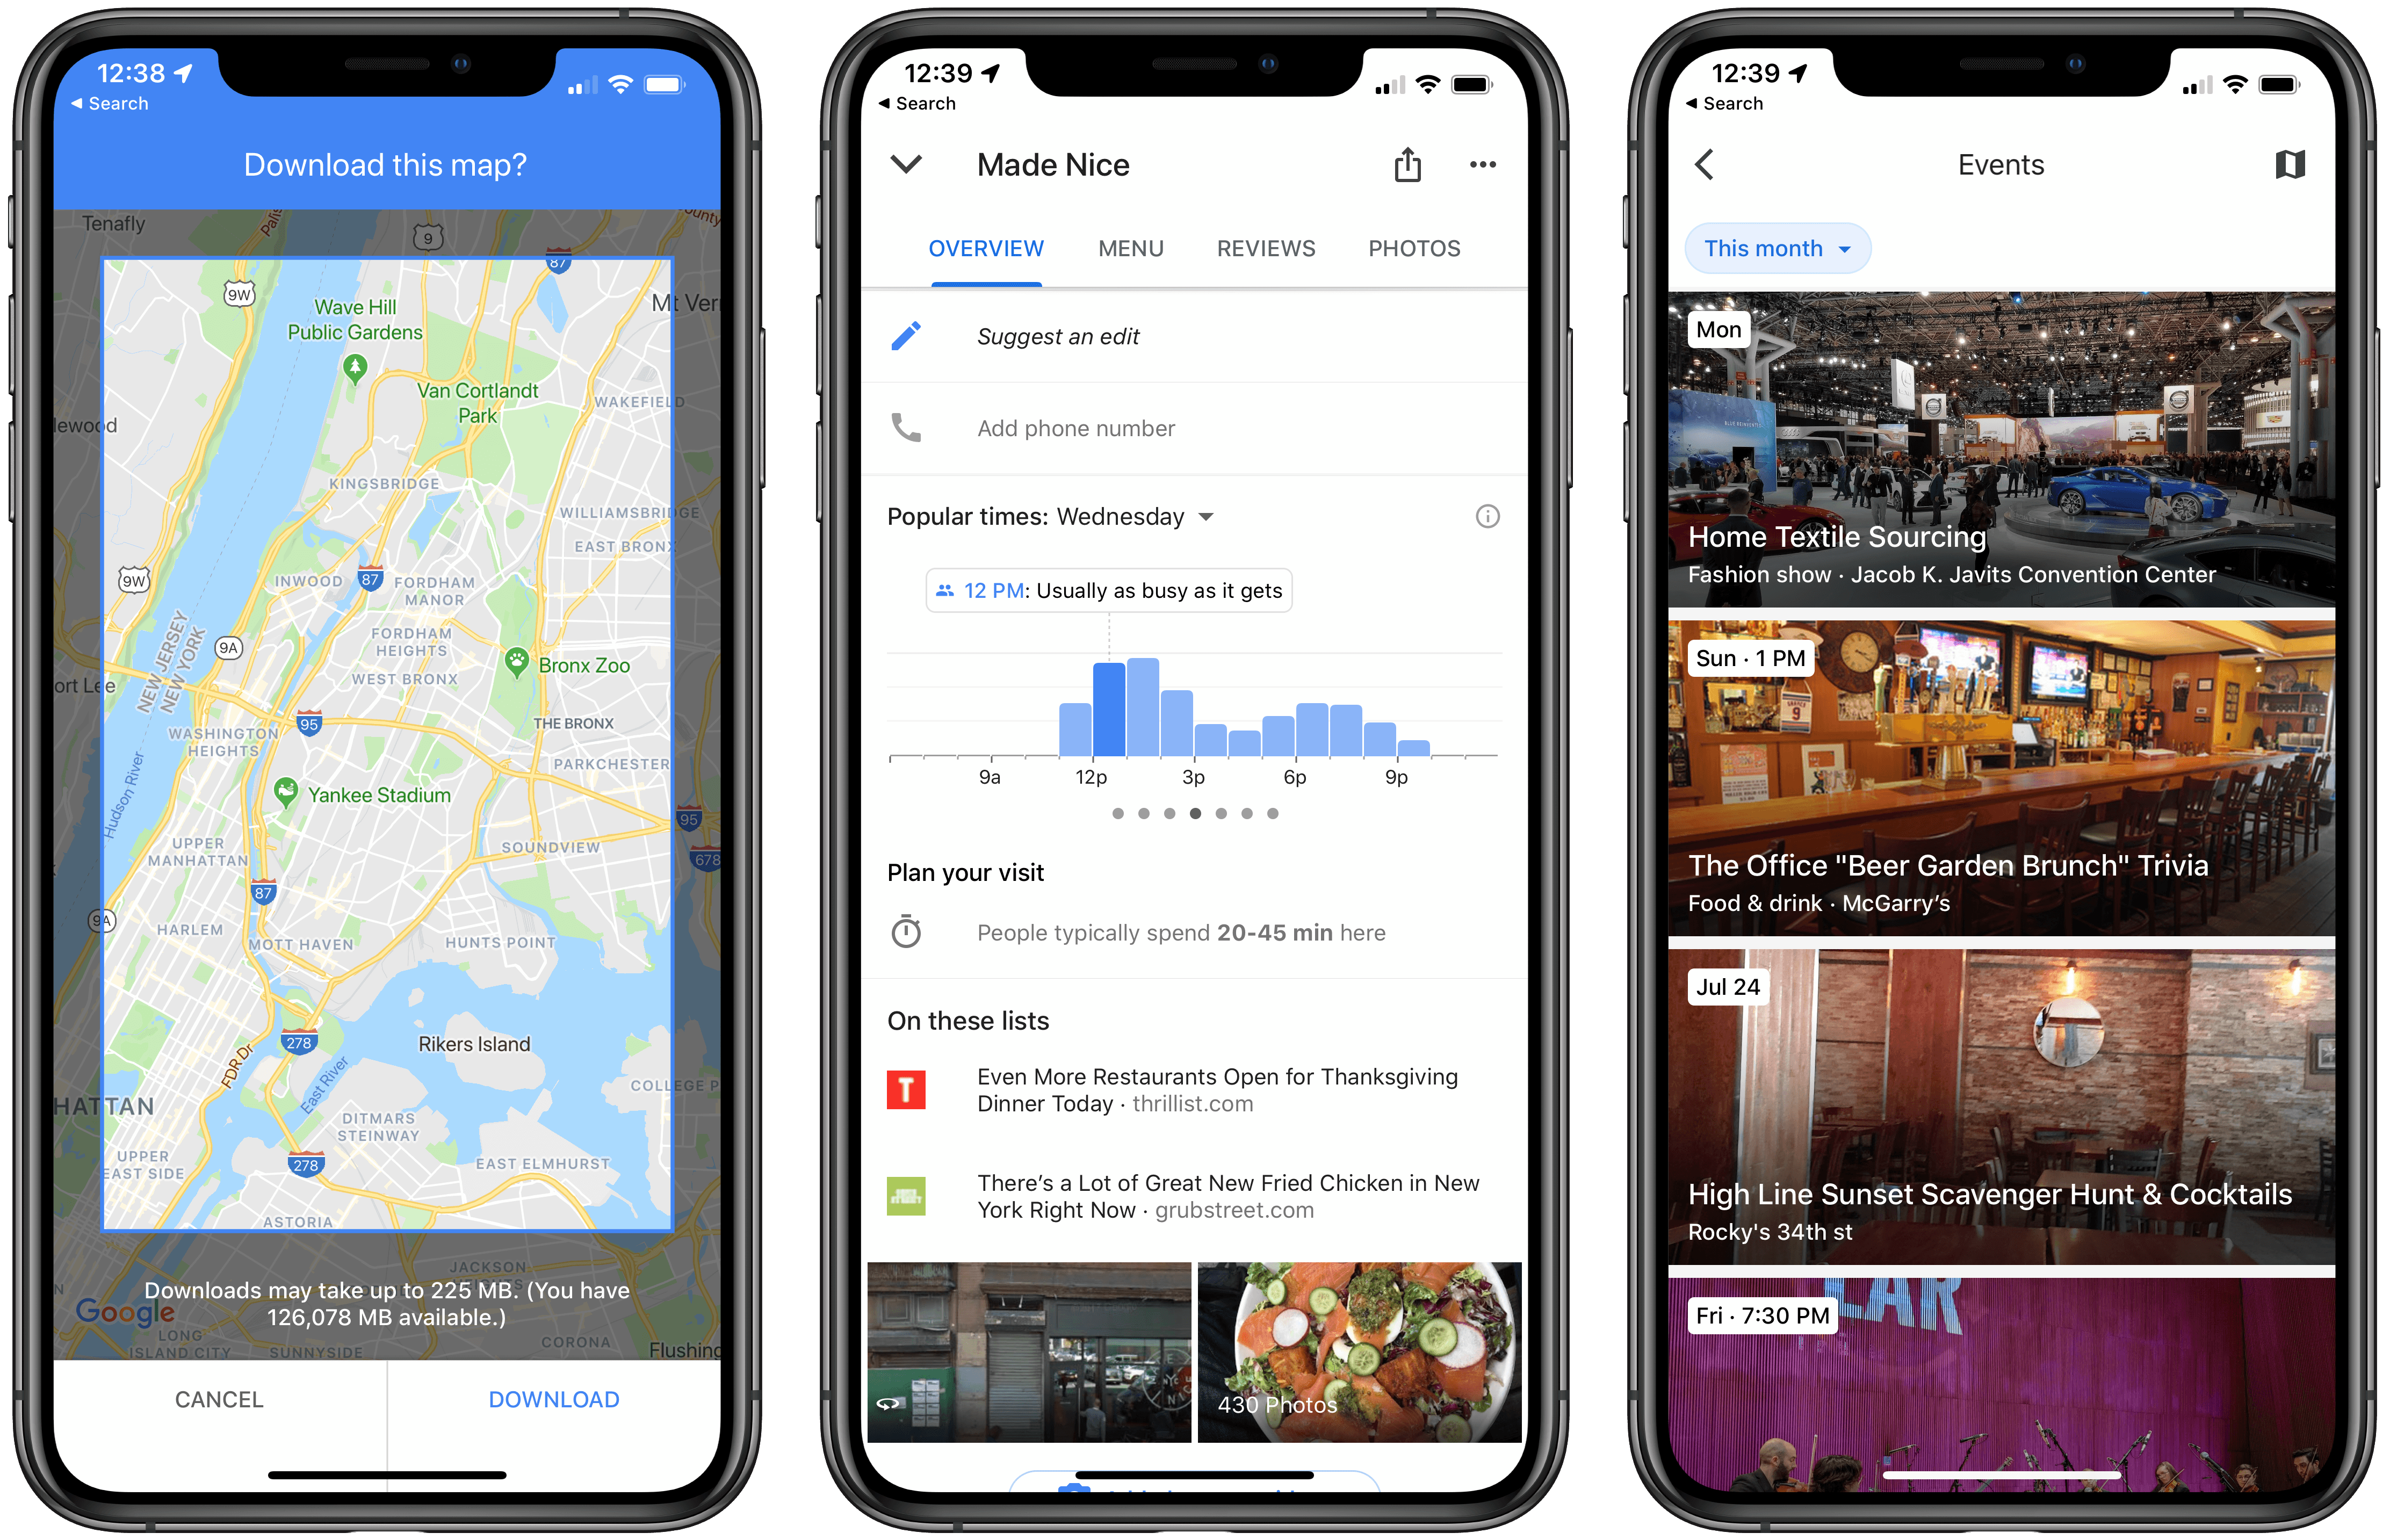 Google Maps still offers a variety of features not available in Apple Maps.